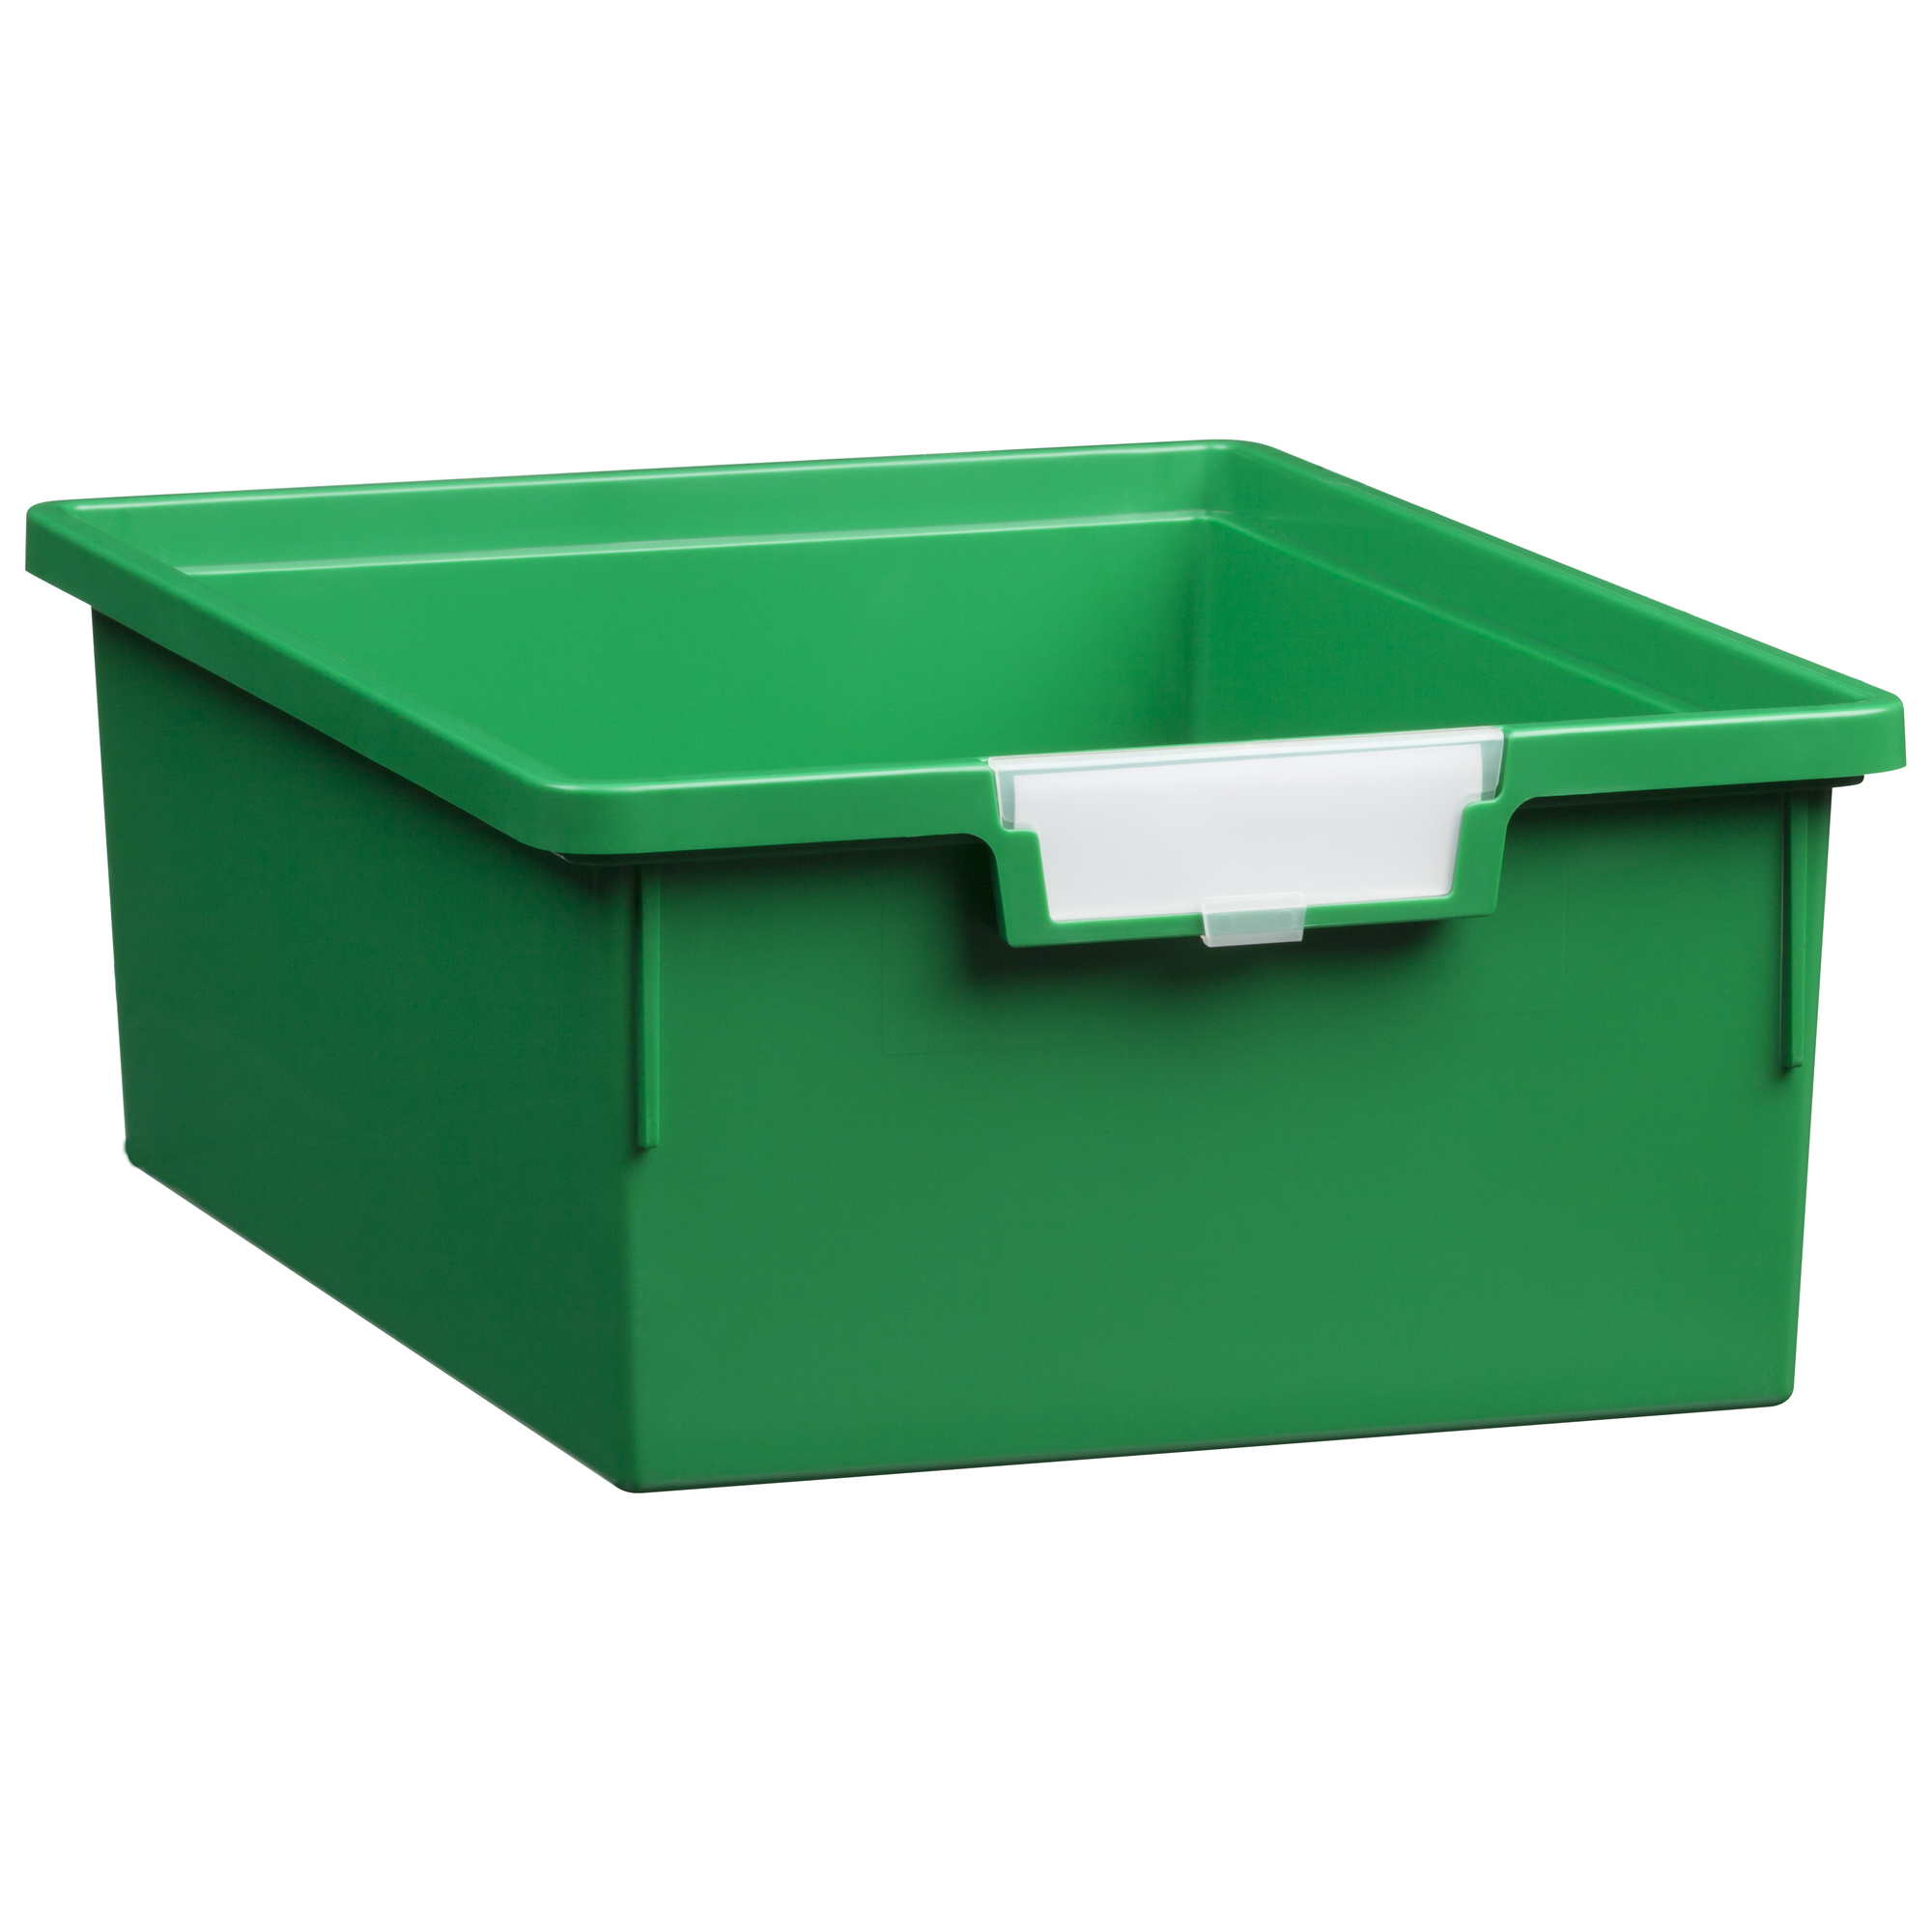 Certwood StorWerks, Slim Line 6Inch Tray in Primary Green-1PK, Included (qty.) 1 Height 6 in, Model CE1952PG1